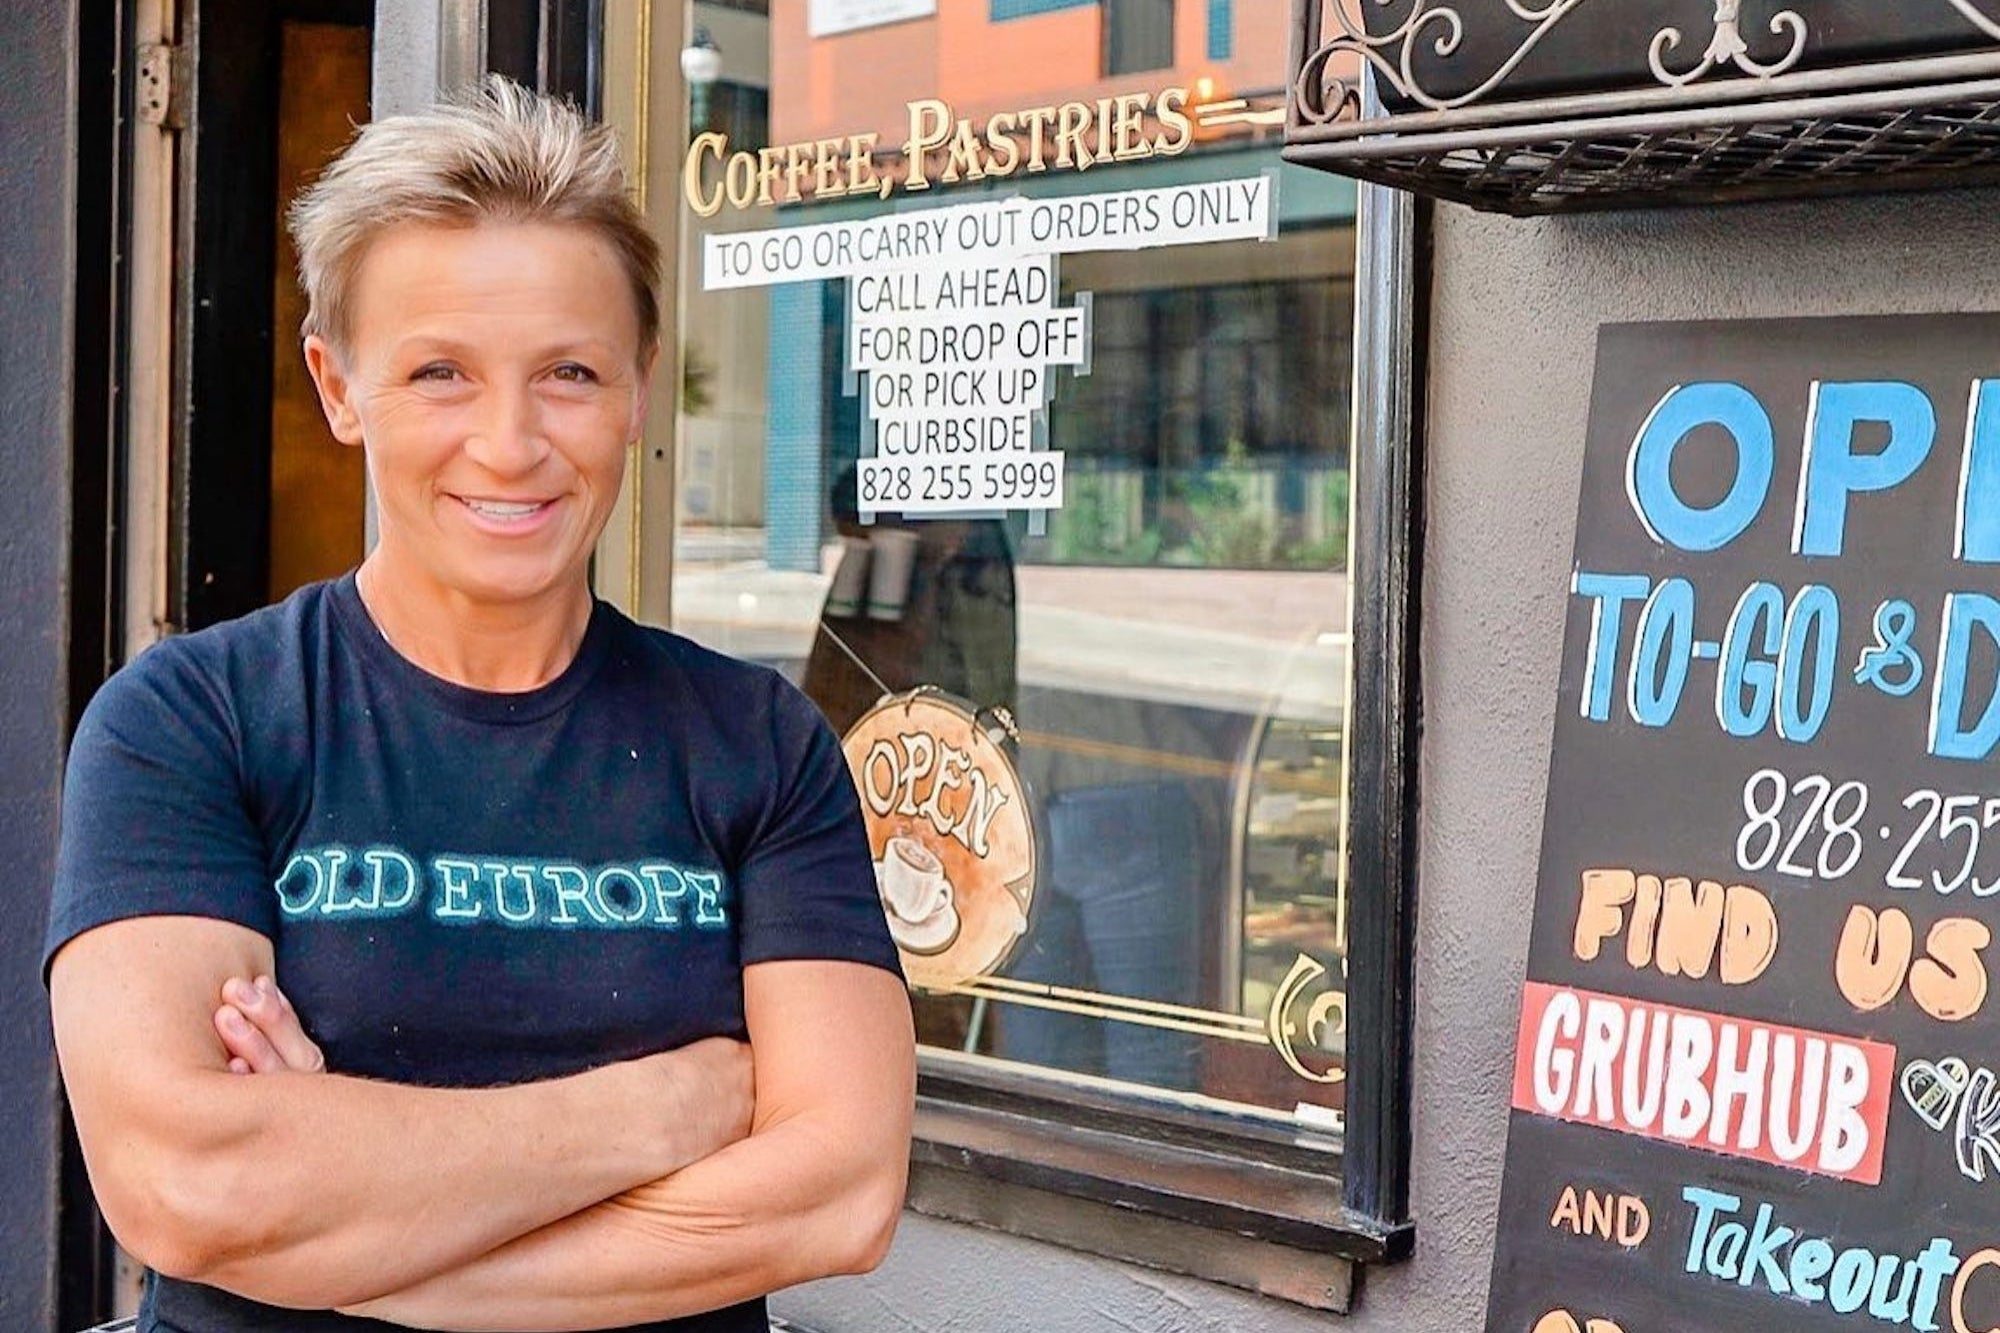 This Entrepreneur Overcame Failure, Grief, and Cancer to Start the Business of Her Dreams